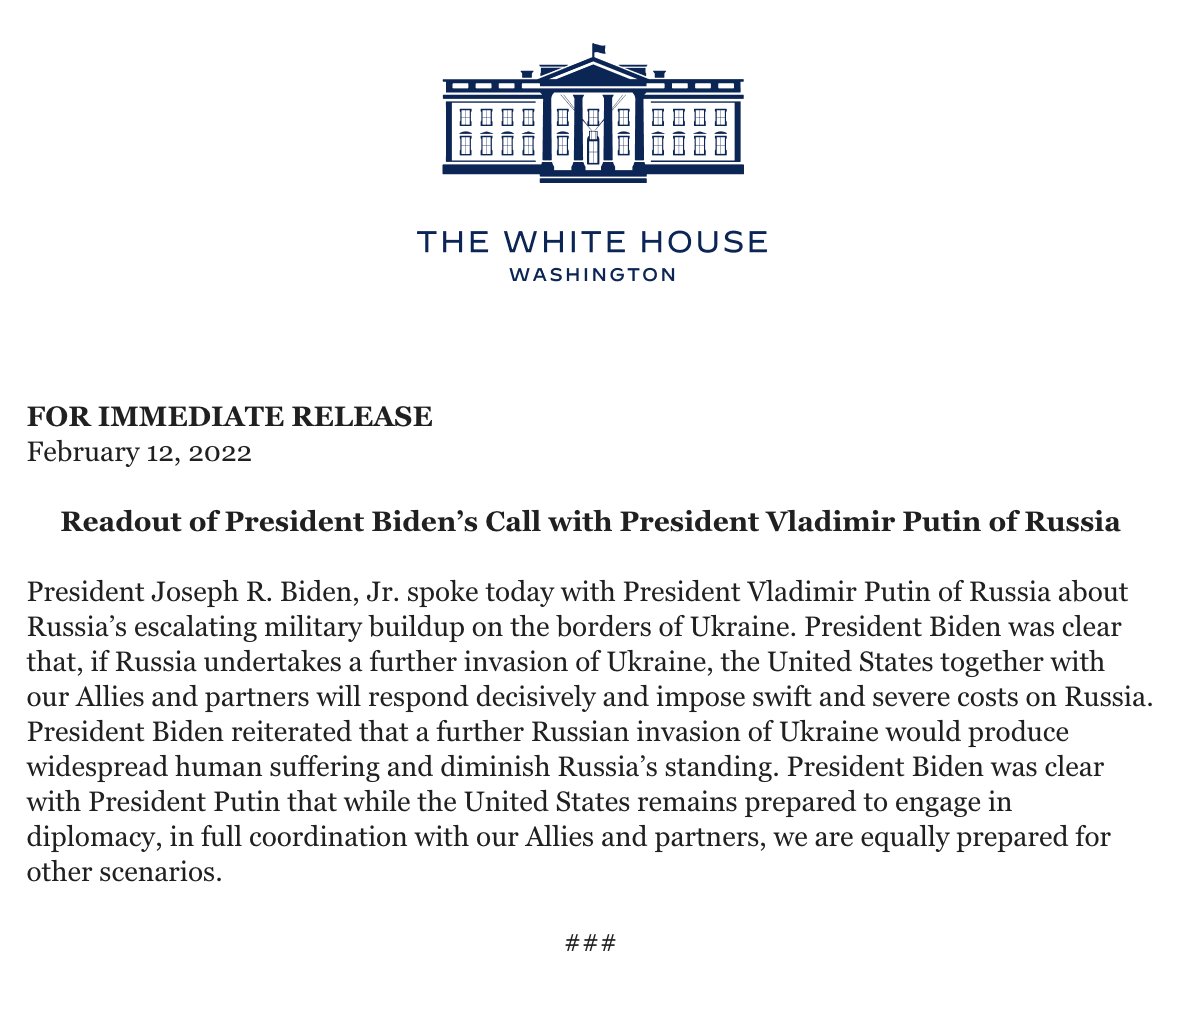 Official WH readout of Biden's call with  Putin:  President Biden was clear with President Putin that while the United States remains prepared to engage in diplomacy, in full coordination with our Allies and partners, we are equally prepared for other scenarios